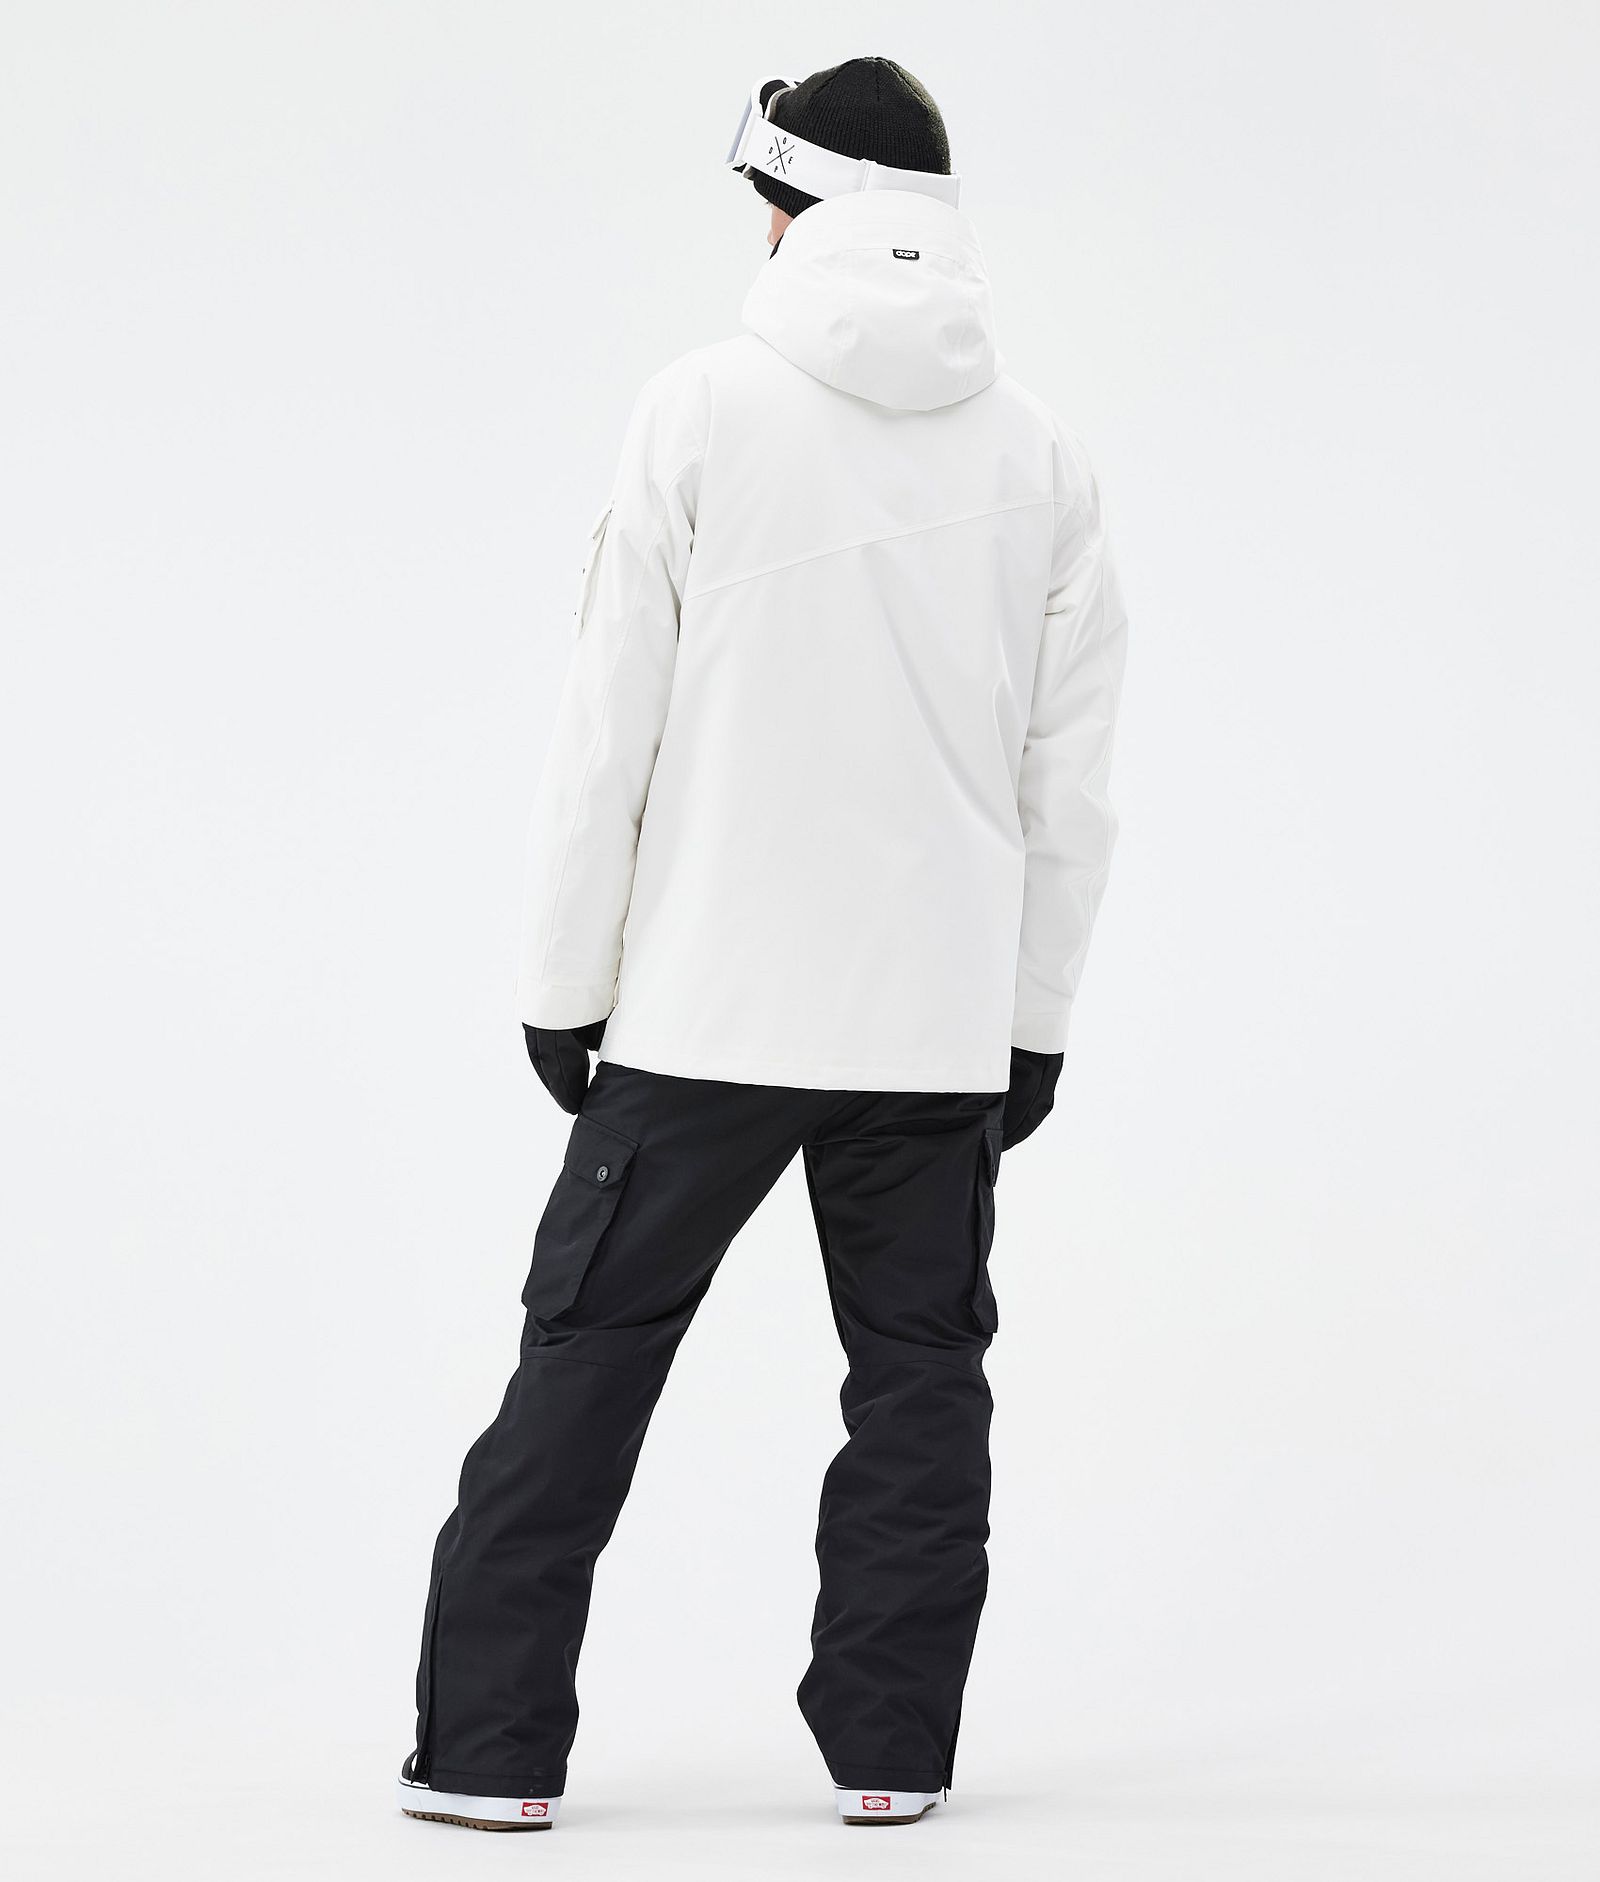 Adept Outfit Snowboard Uomo Old White/Blackout